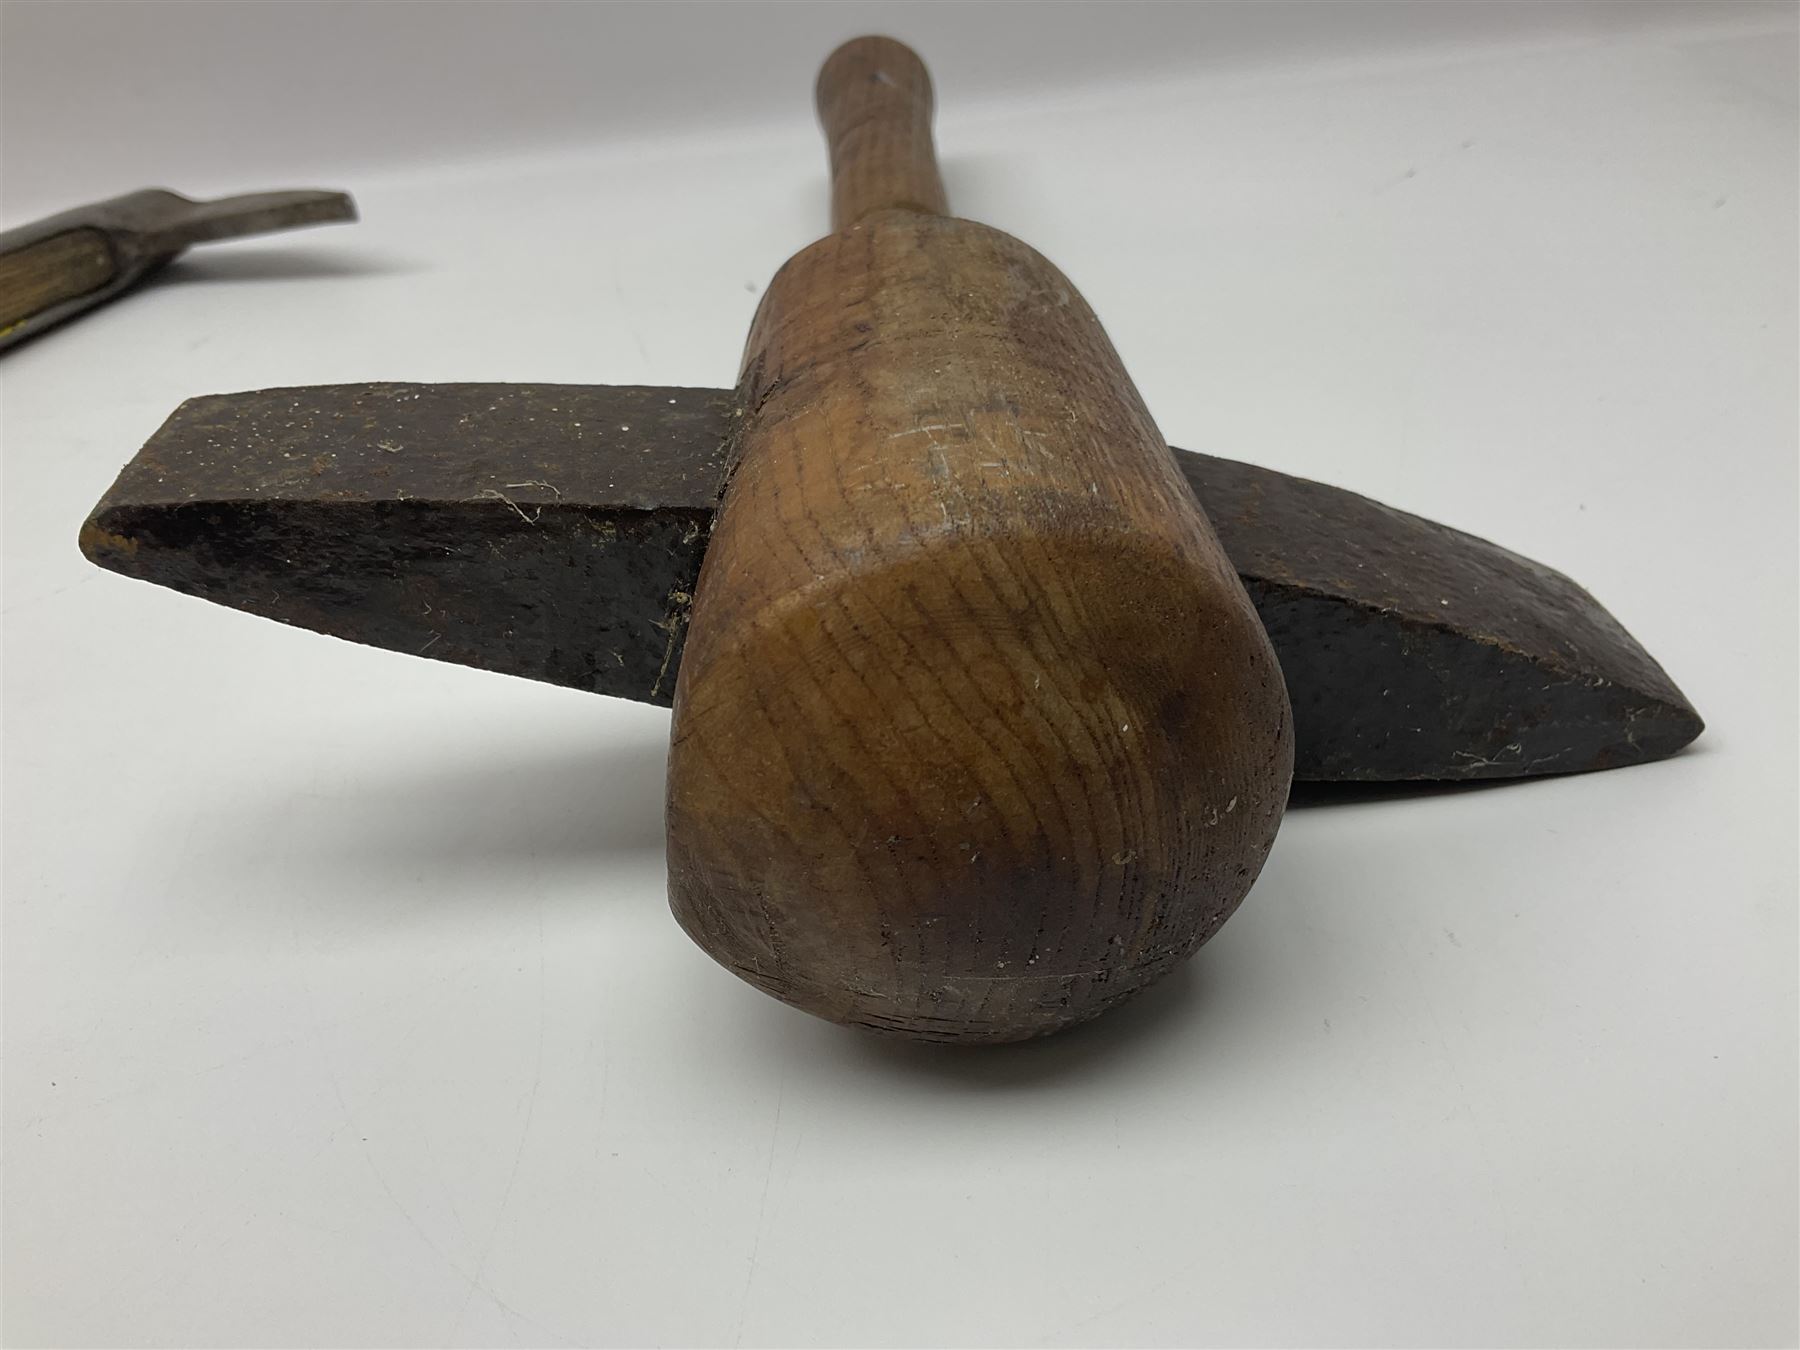 Post-War military type fireman's axe impressed 'PERKS 1953/54' with additional indistinct mark proba - Image 6 of 19